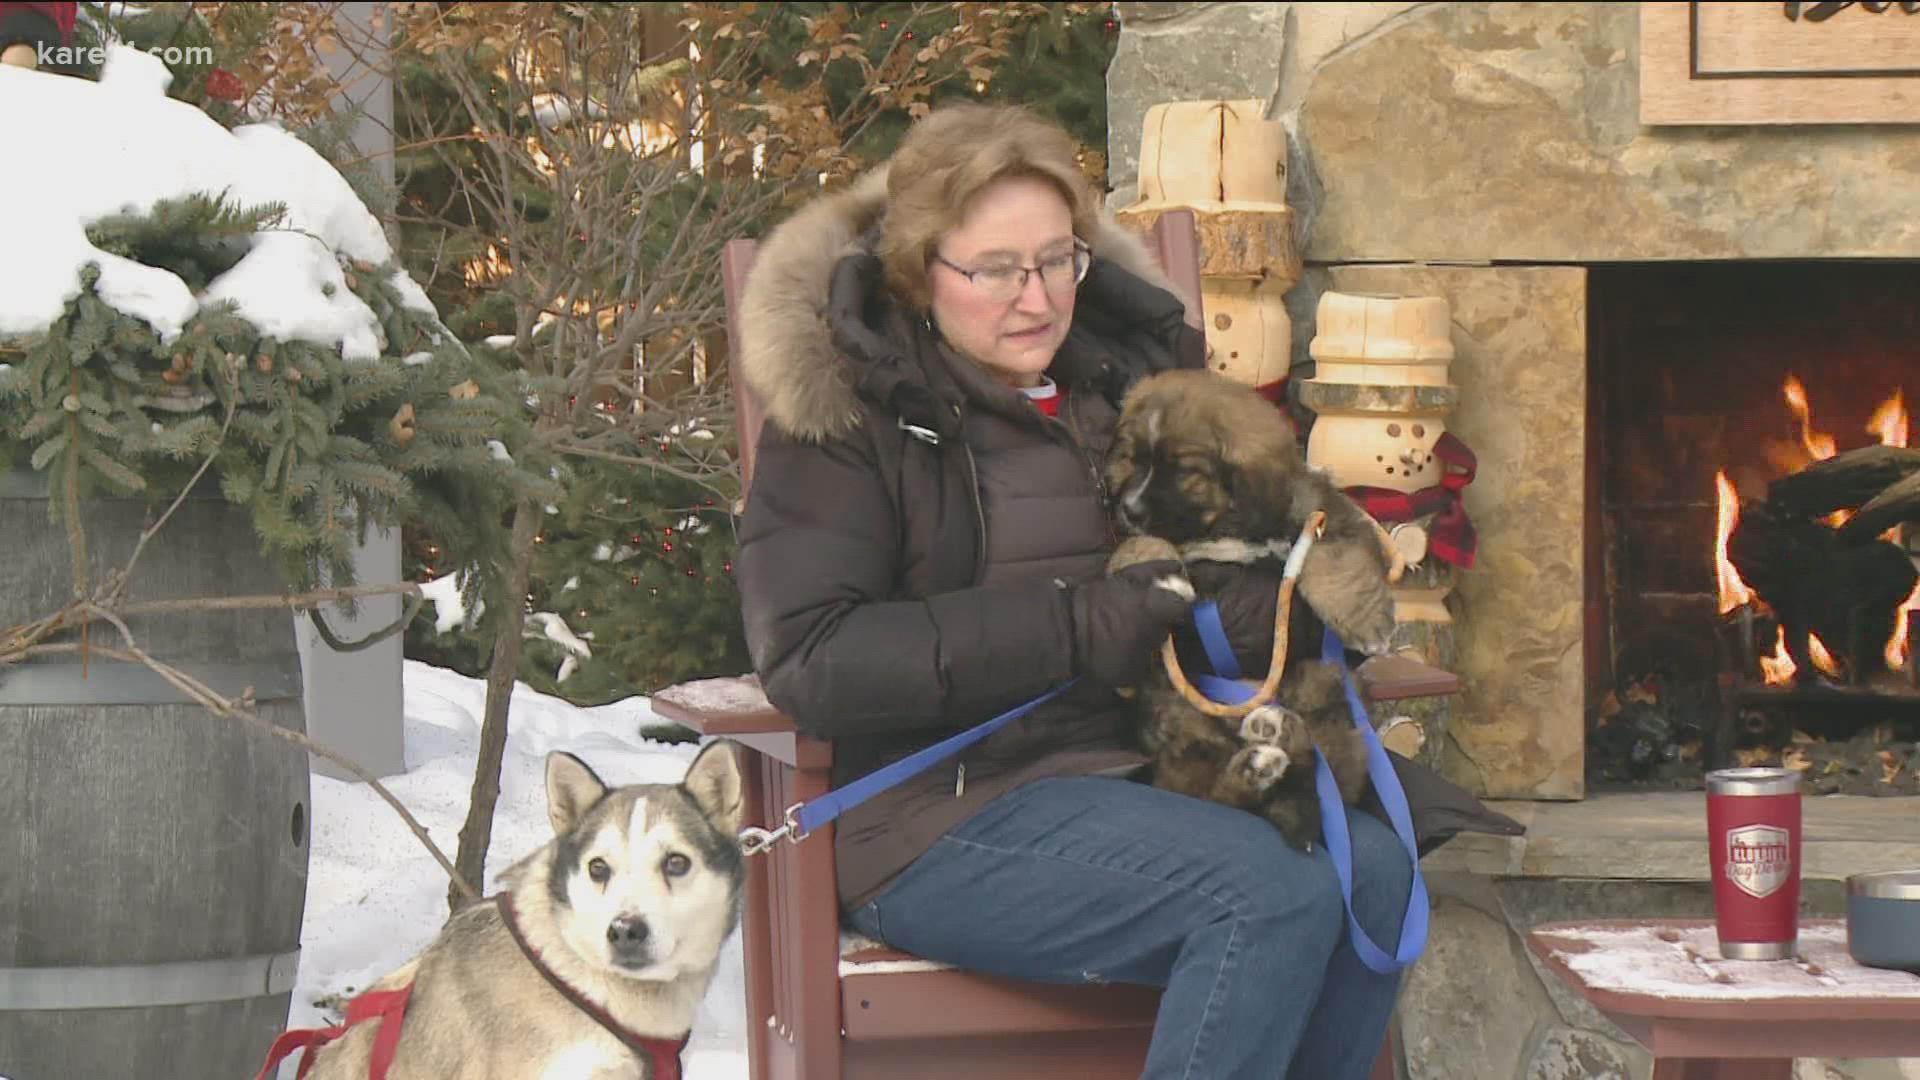 Dr. Jackie Piepkorn explained on Saturday morning what kind of dogs are considered sled dogs and why they enjoy running so much.